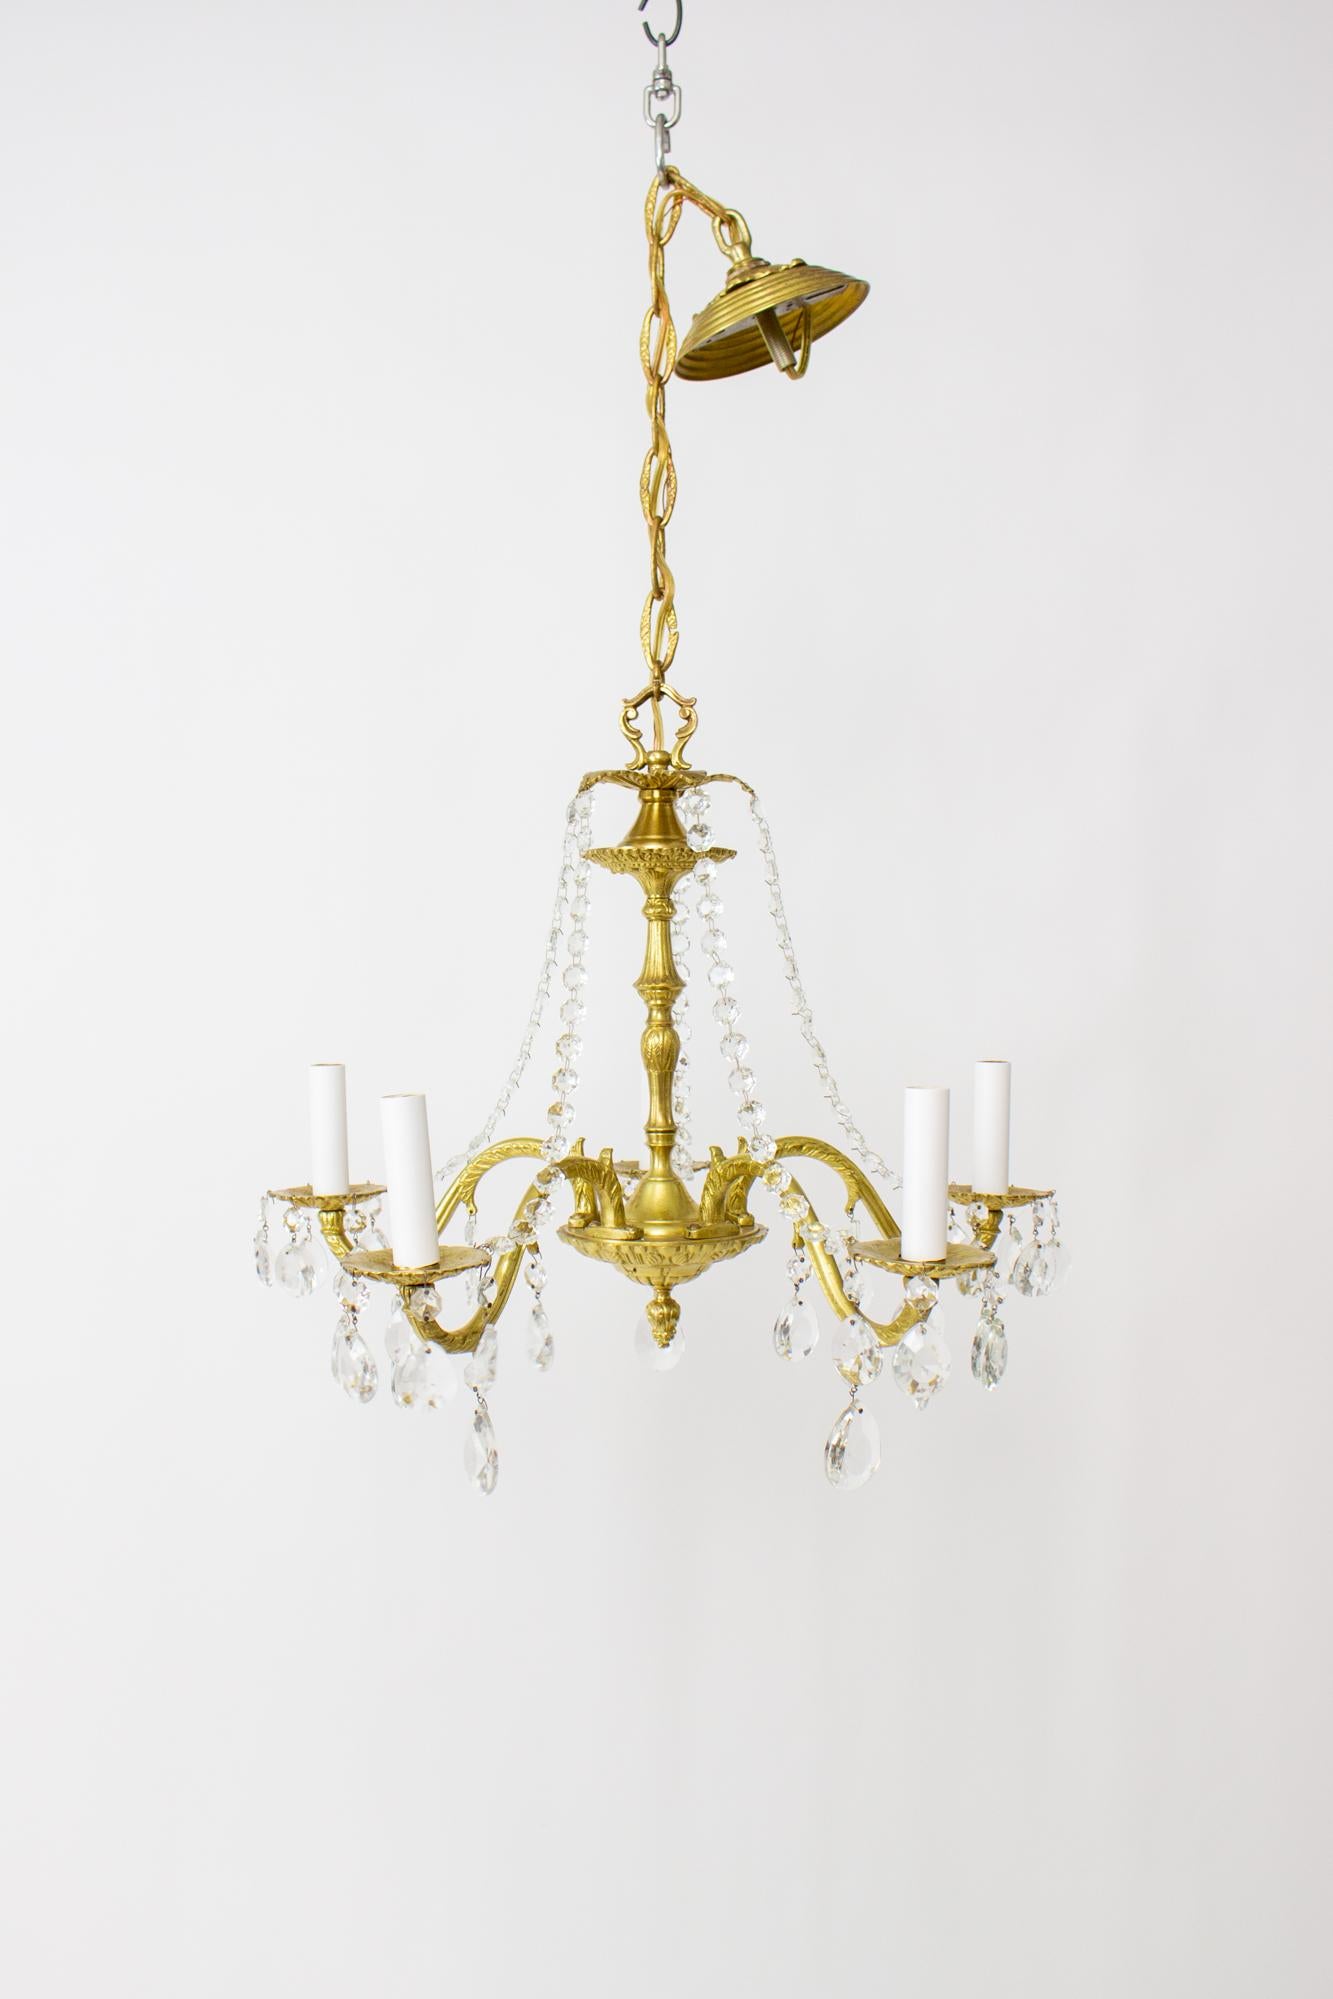 Cast brass and crystal chandelier. Nicely cast brass arms, stem and body. Five arms, with crystals hanging below each light around the cast brass bobeche. Strands of crystals drape from the crown down towards the arms. Brass has been cleaned,